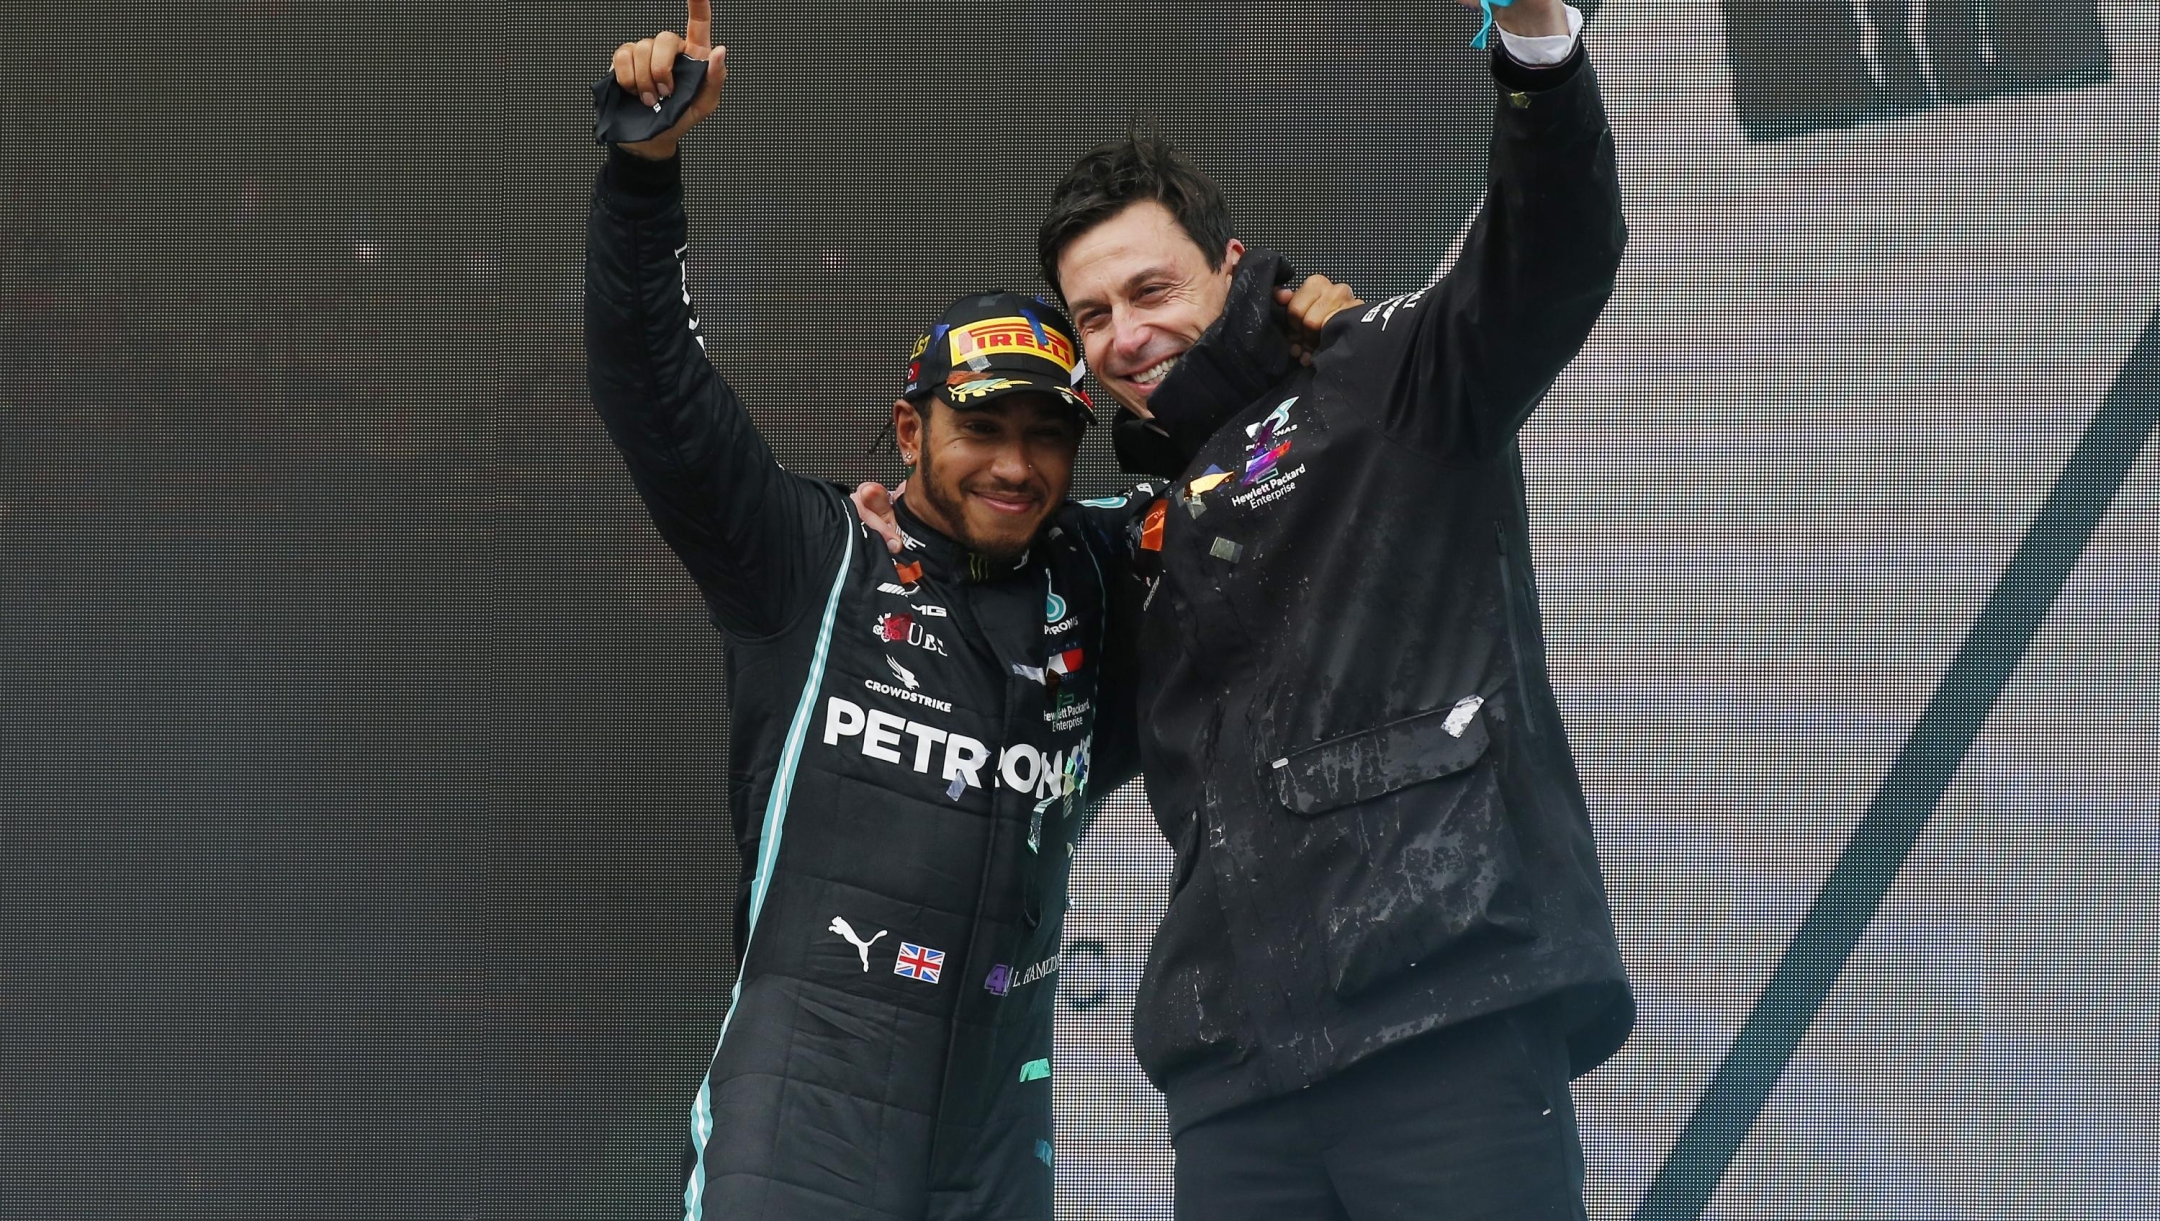 ISTANBUL, TURKEY - NOVEMBER 15: Race winner Lewis Hamilton of Great Britain and Mercedes GP celebrates winning a 7th F1 World Drivers Championship with Mercedes GP Executive Director Toto Wolff on the podium during the F1 Grand Prix of Turkey at Intercity Istanbul Park on November 15, 2020 in Istanbul, Turkey. (Photo by Kenan Asyali - Pool/Getty Images)